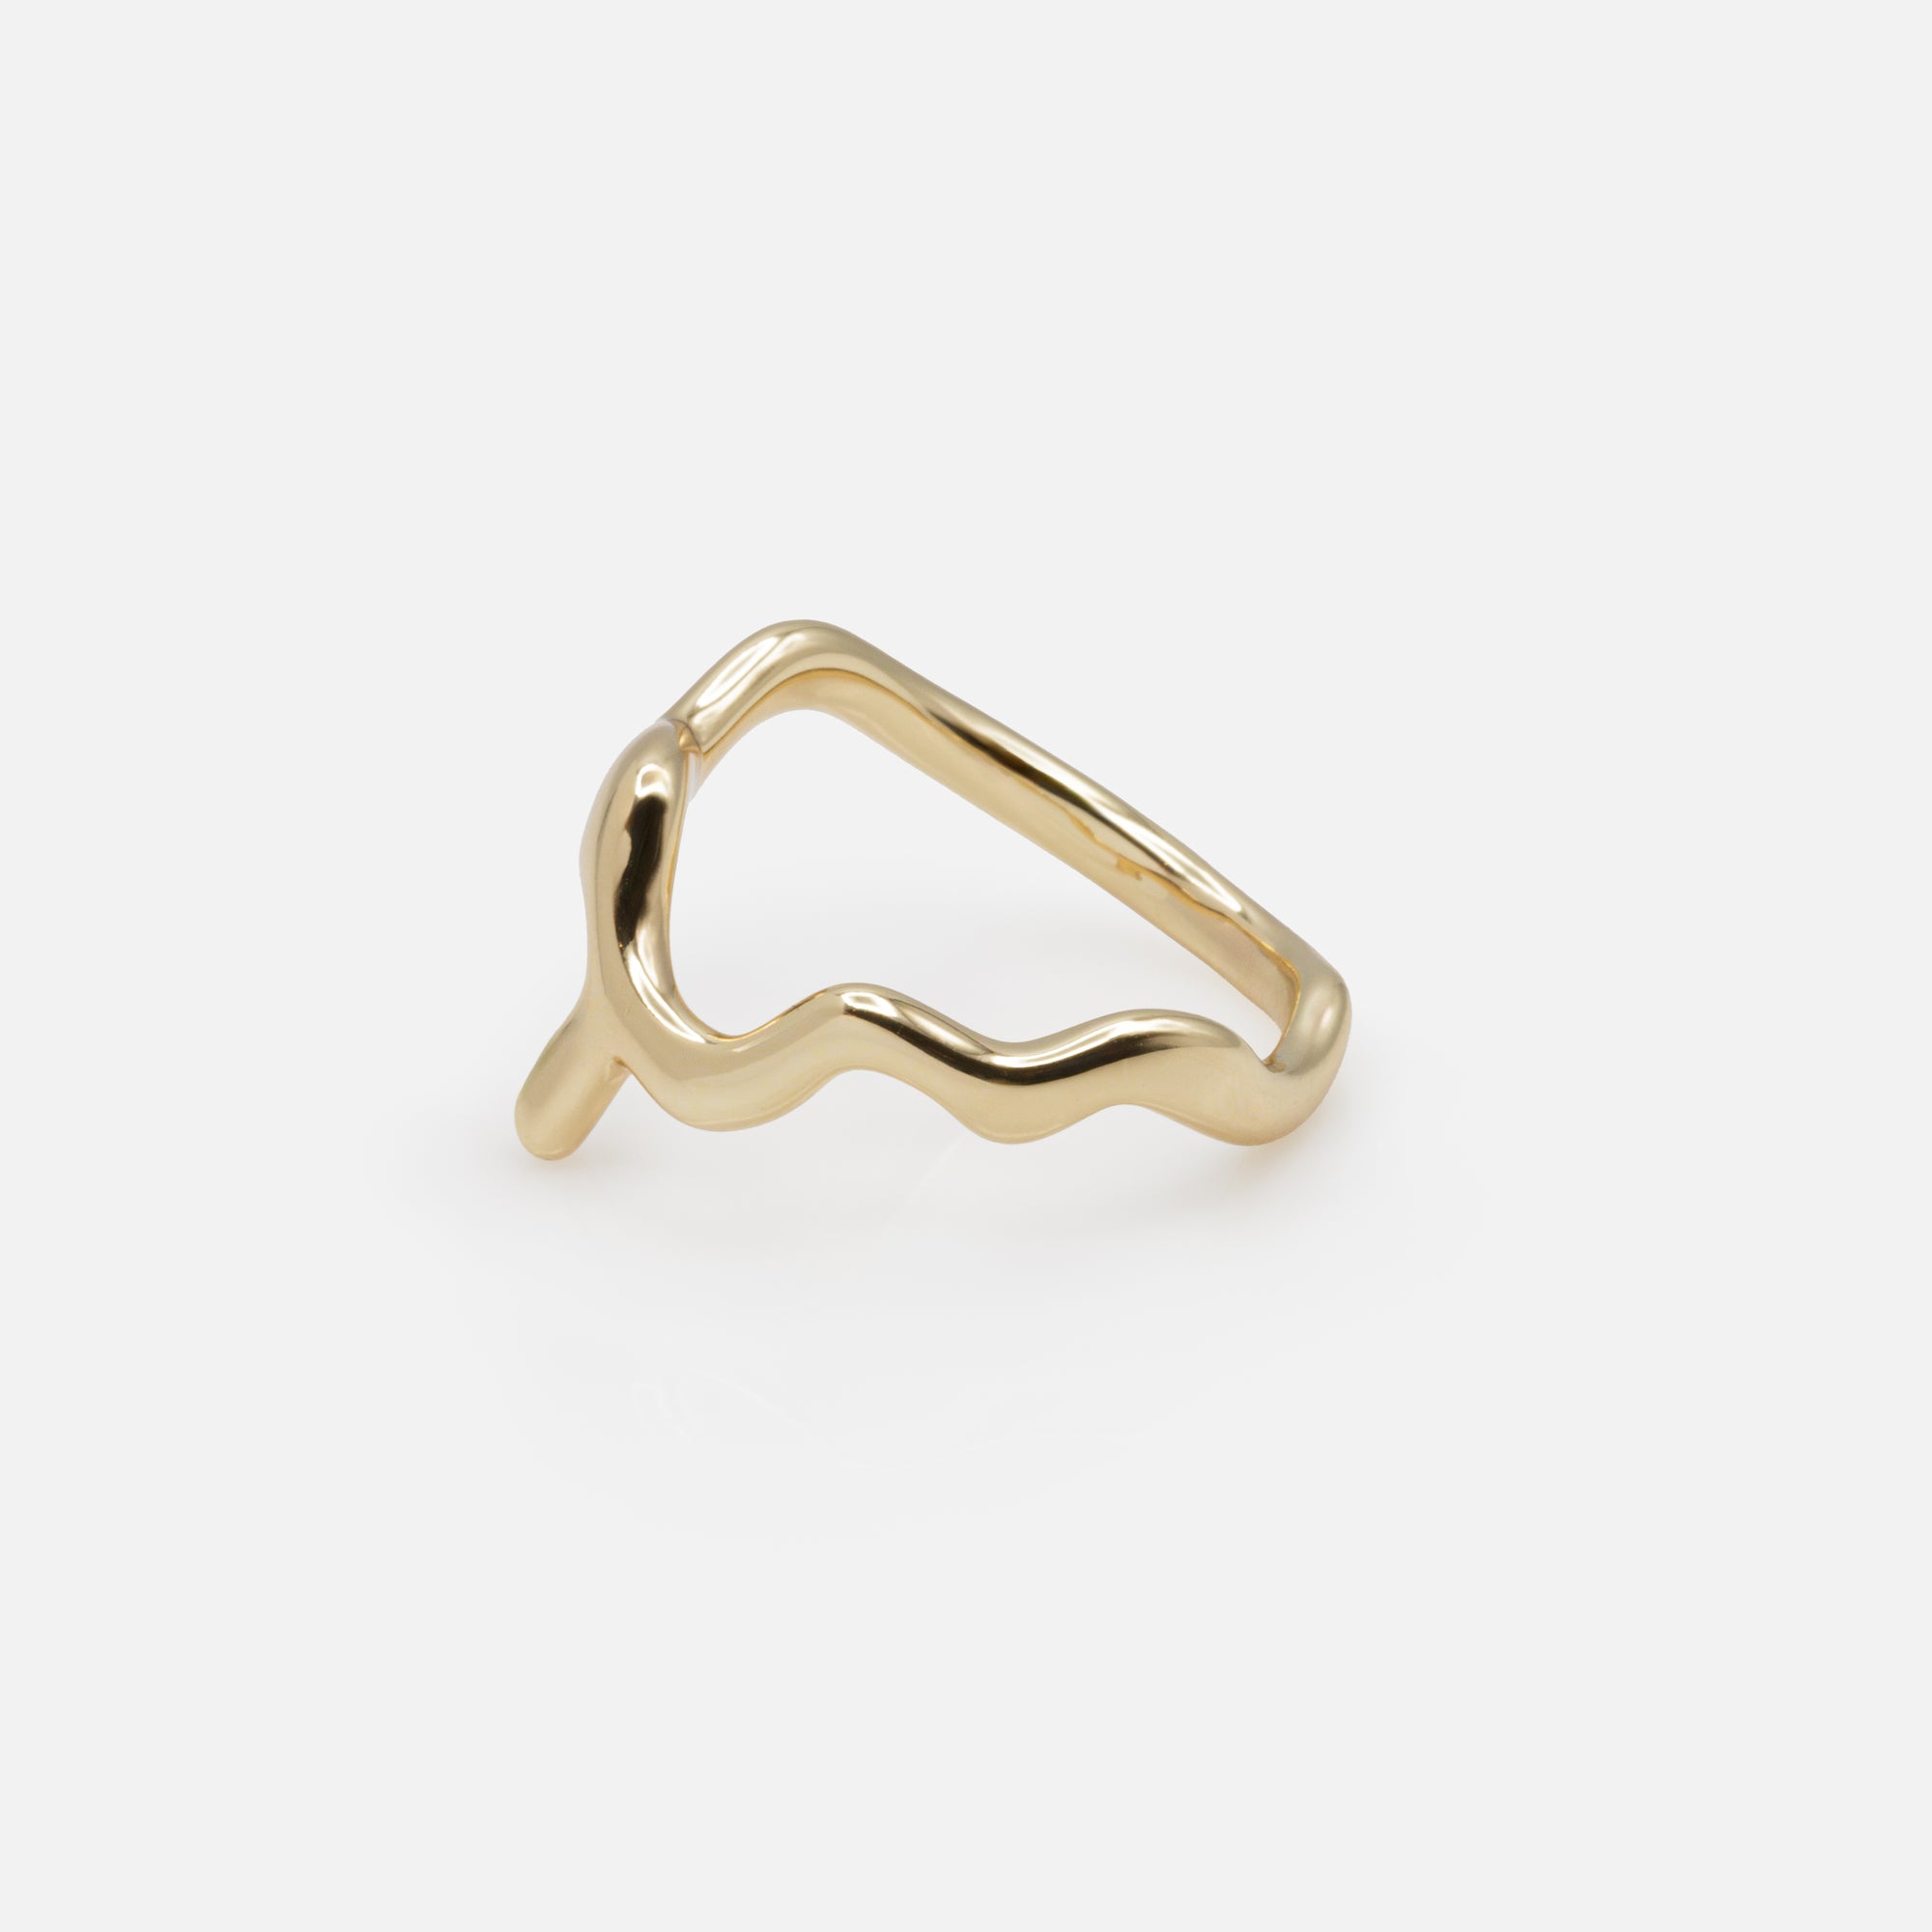 Duo of golden rings with irregular curves and delicate patterns